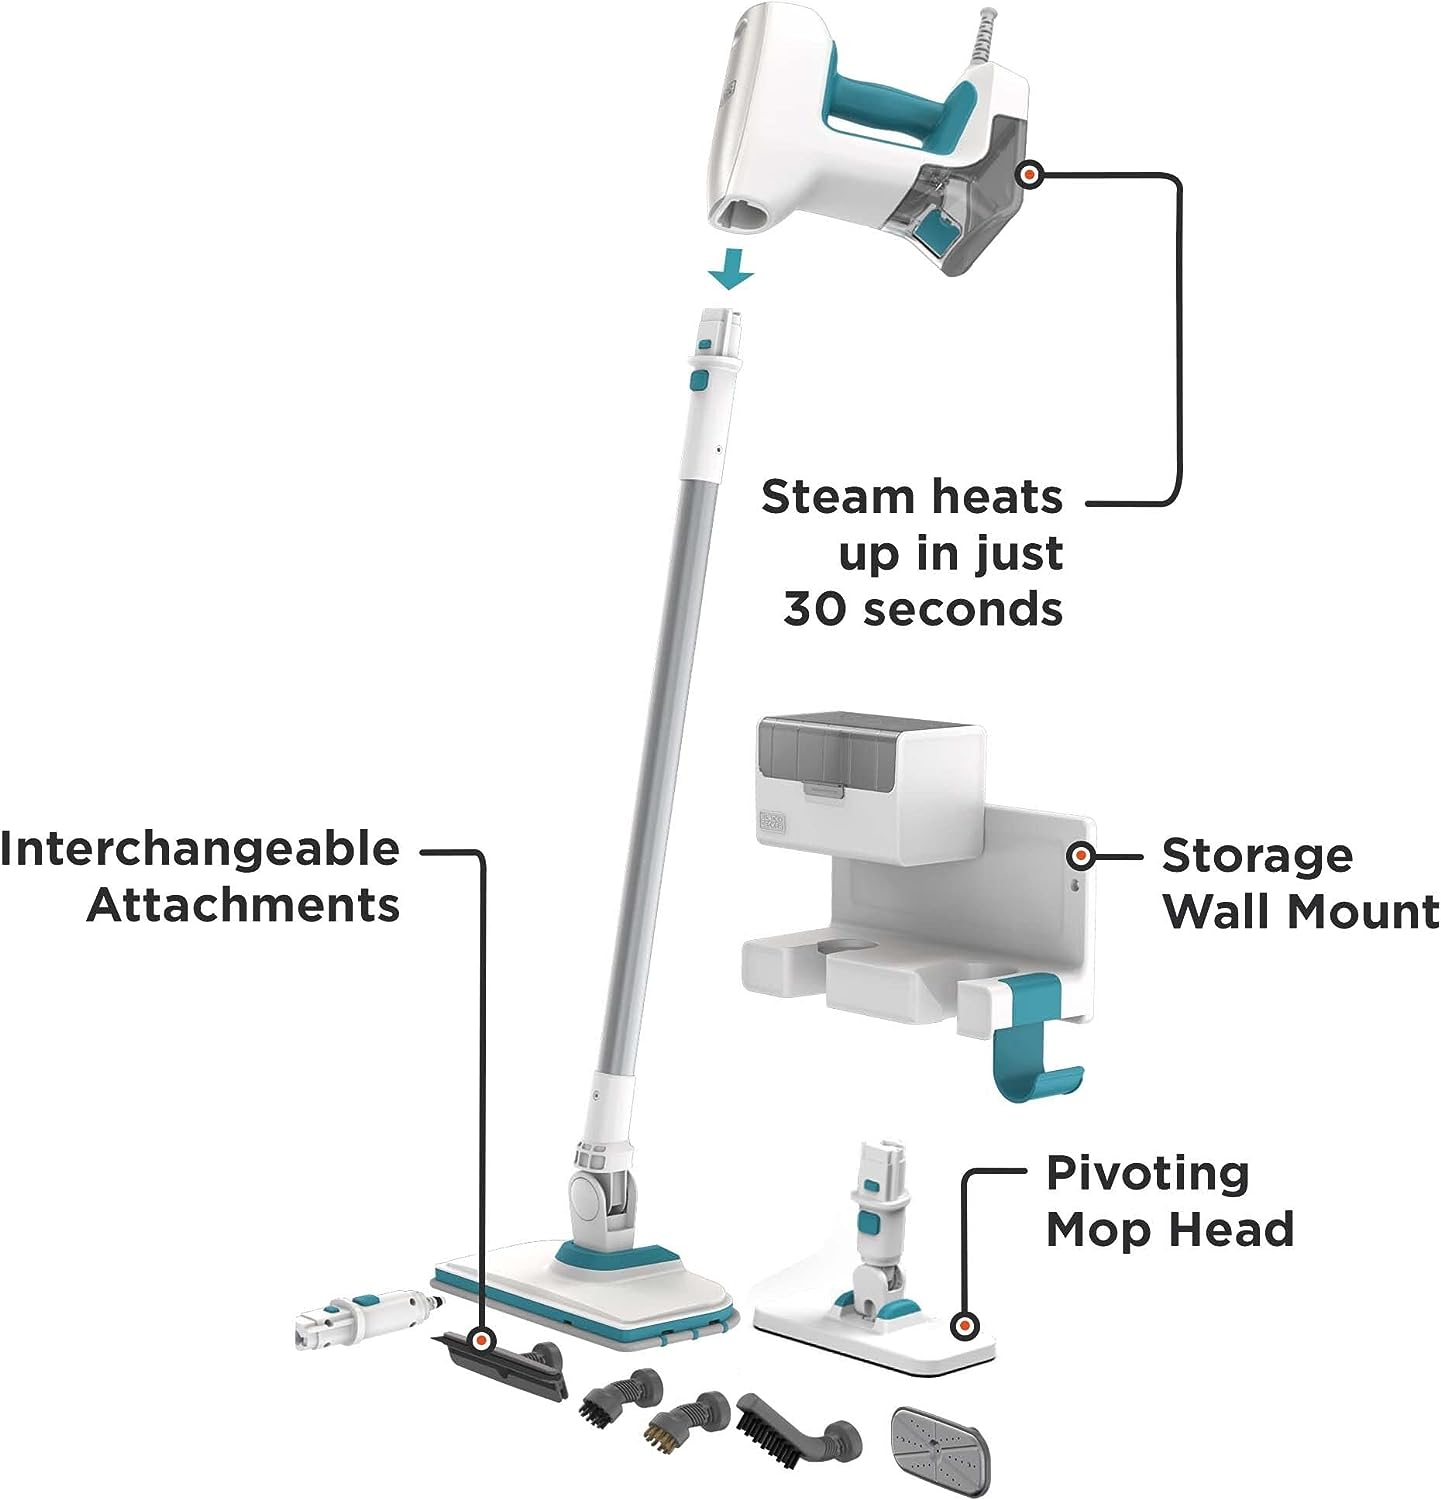  BLACK+DECKER Steamer, 7 Attachments for Multipurpose Cleaning,  Includes Storage Wall Mount (BHSM15FX10)